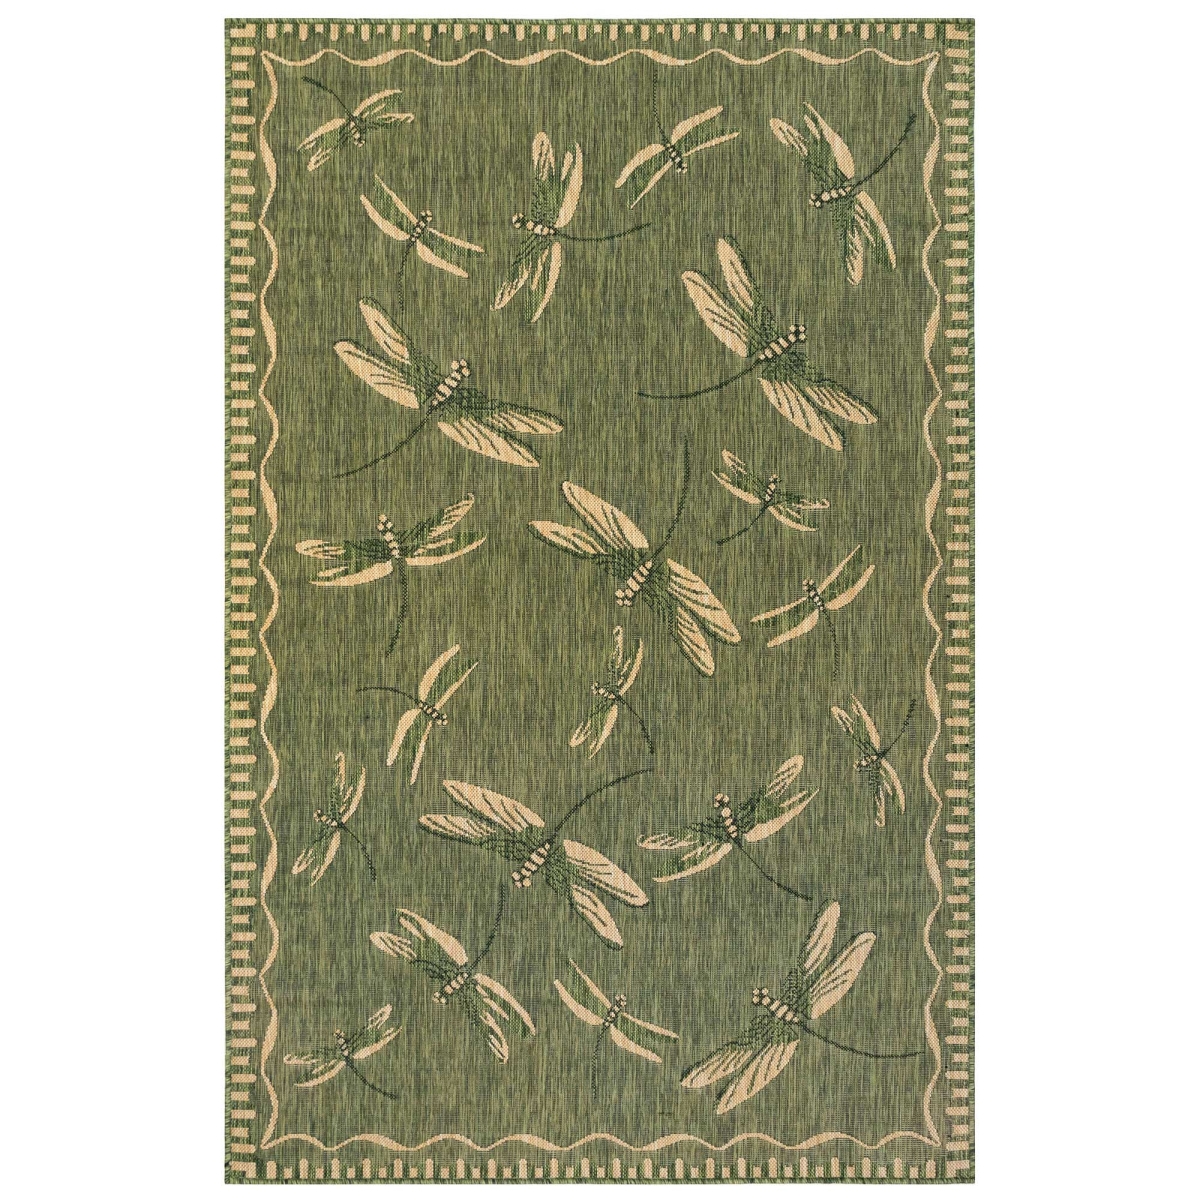 Trans-ocean Imports Cre58844006 Liora Manne Carmel Dragonfly Indoor & Outdoor Rug, Green - 4 Ft. 10 In. X 7 Ft. 6 In.